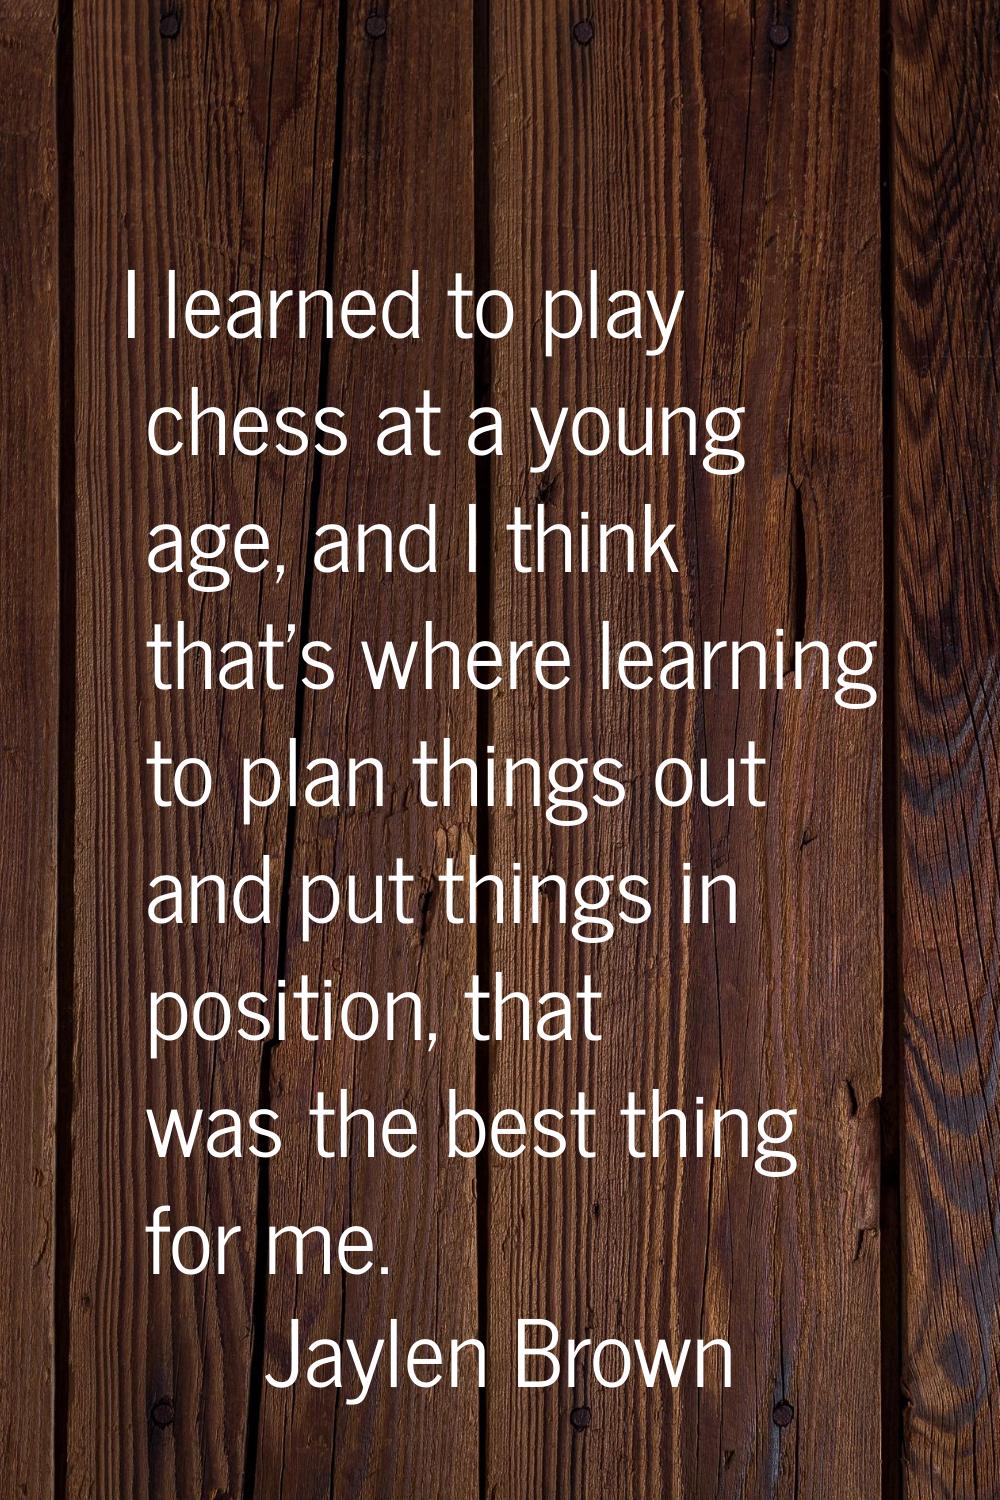 I learned to play chess at a young age, and I think that's where learning to plan things out and pu